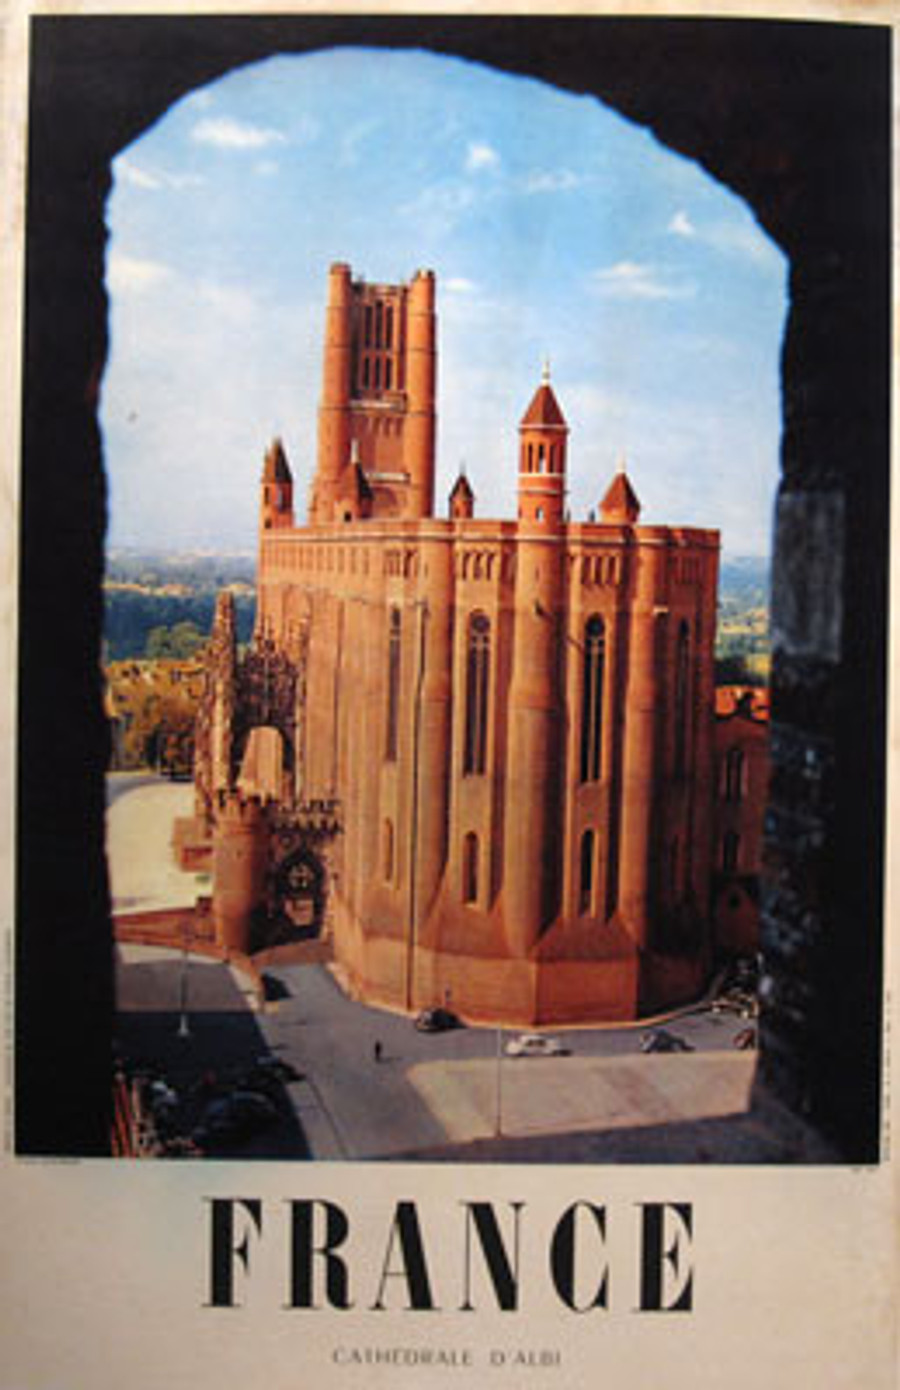 France Cathedral D'Albi vintage travel poster from 1954 depicts Cathedral Basilica of Saint Cecilia in Albi, southern France.